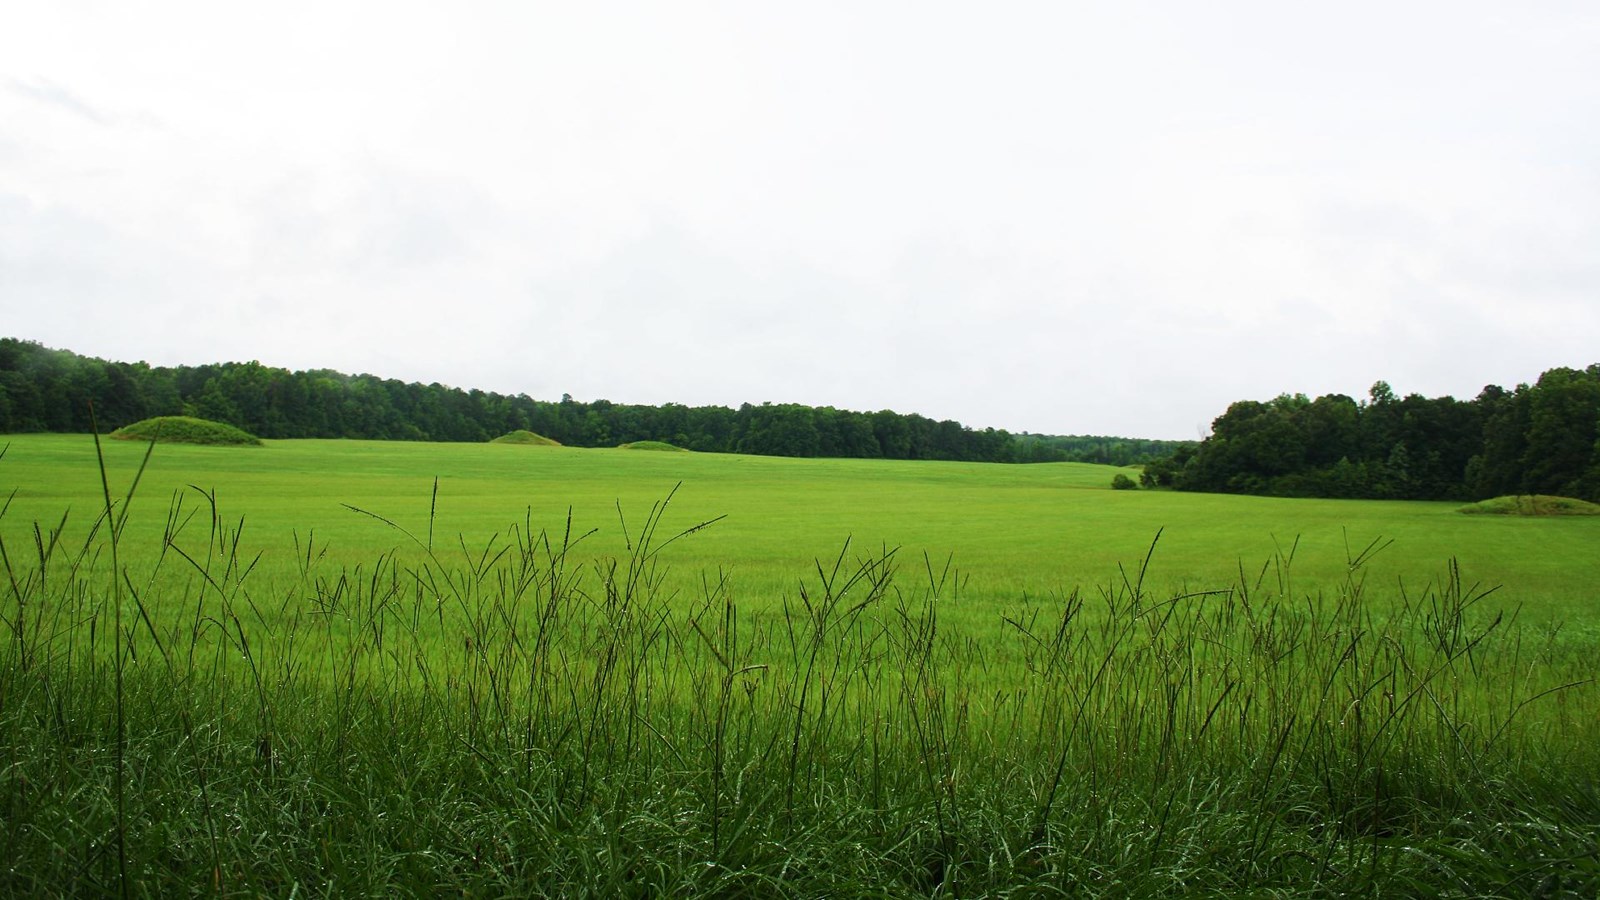 Tall green grass stands in the front, a field separates the viewer from 6 visible mounds. 